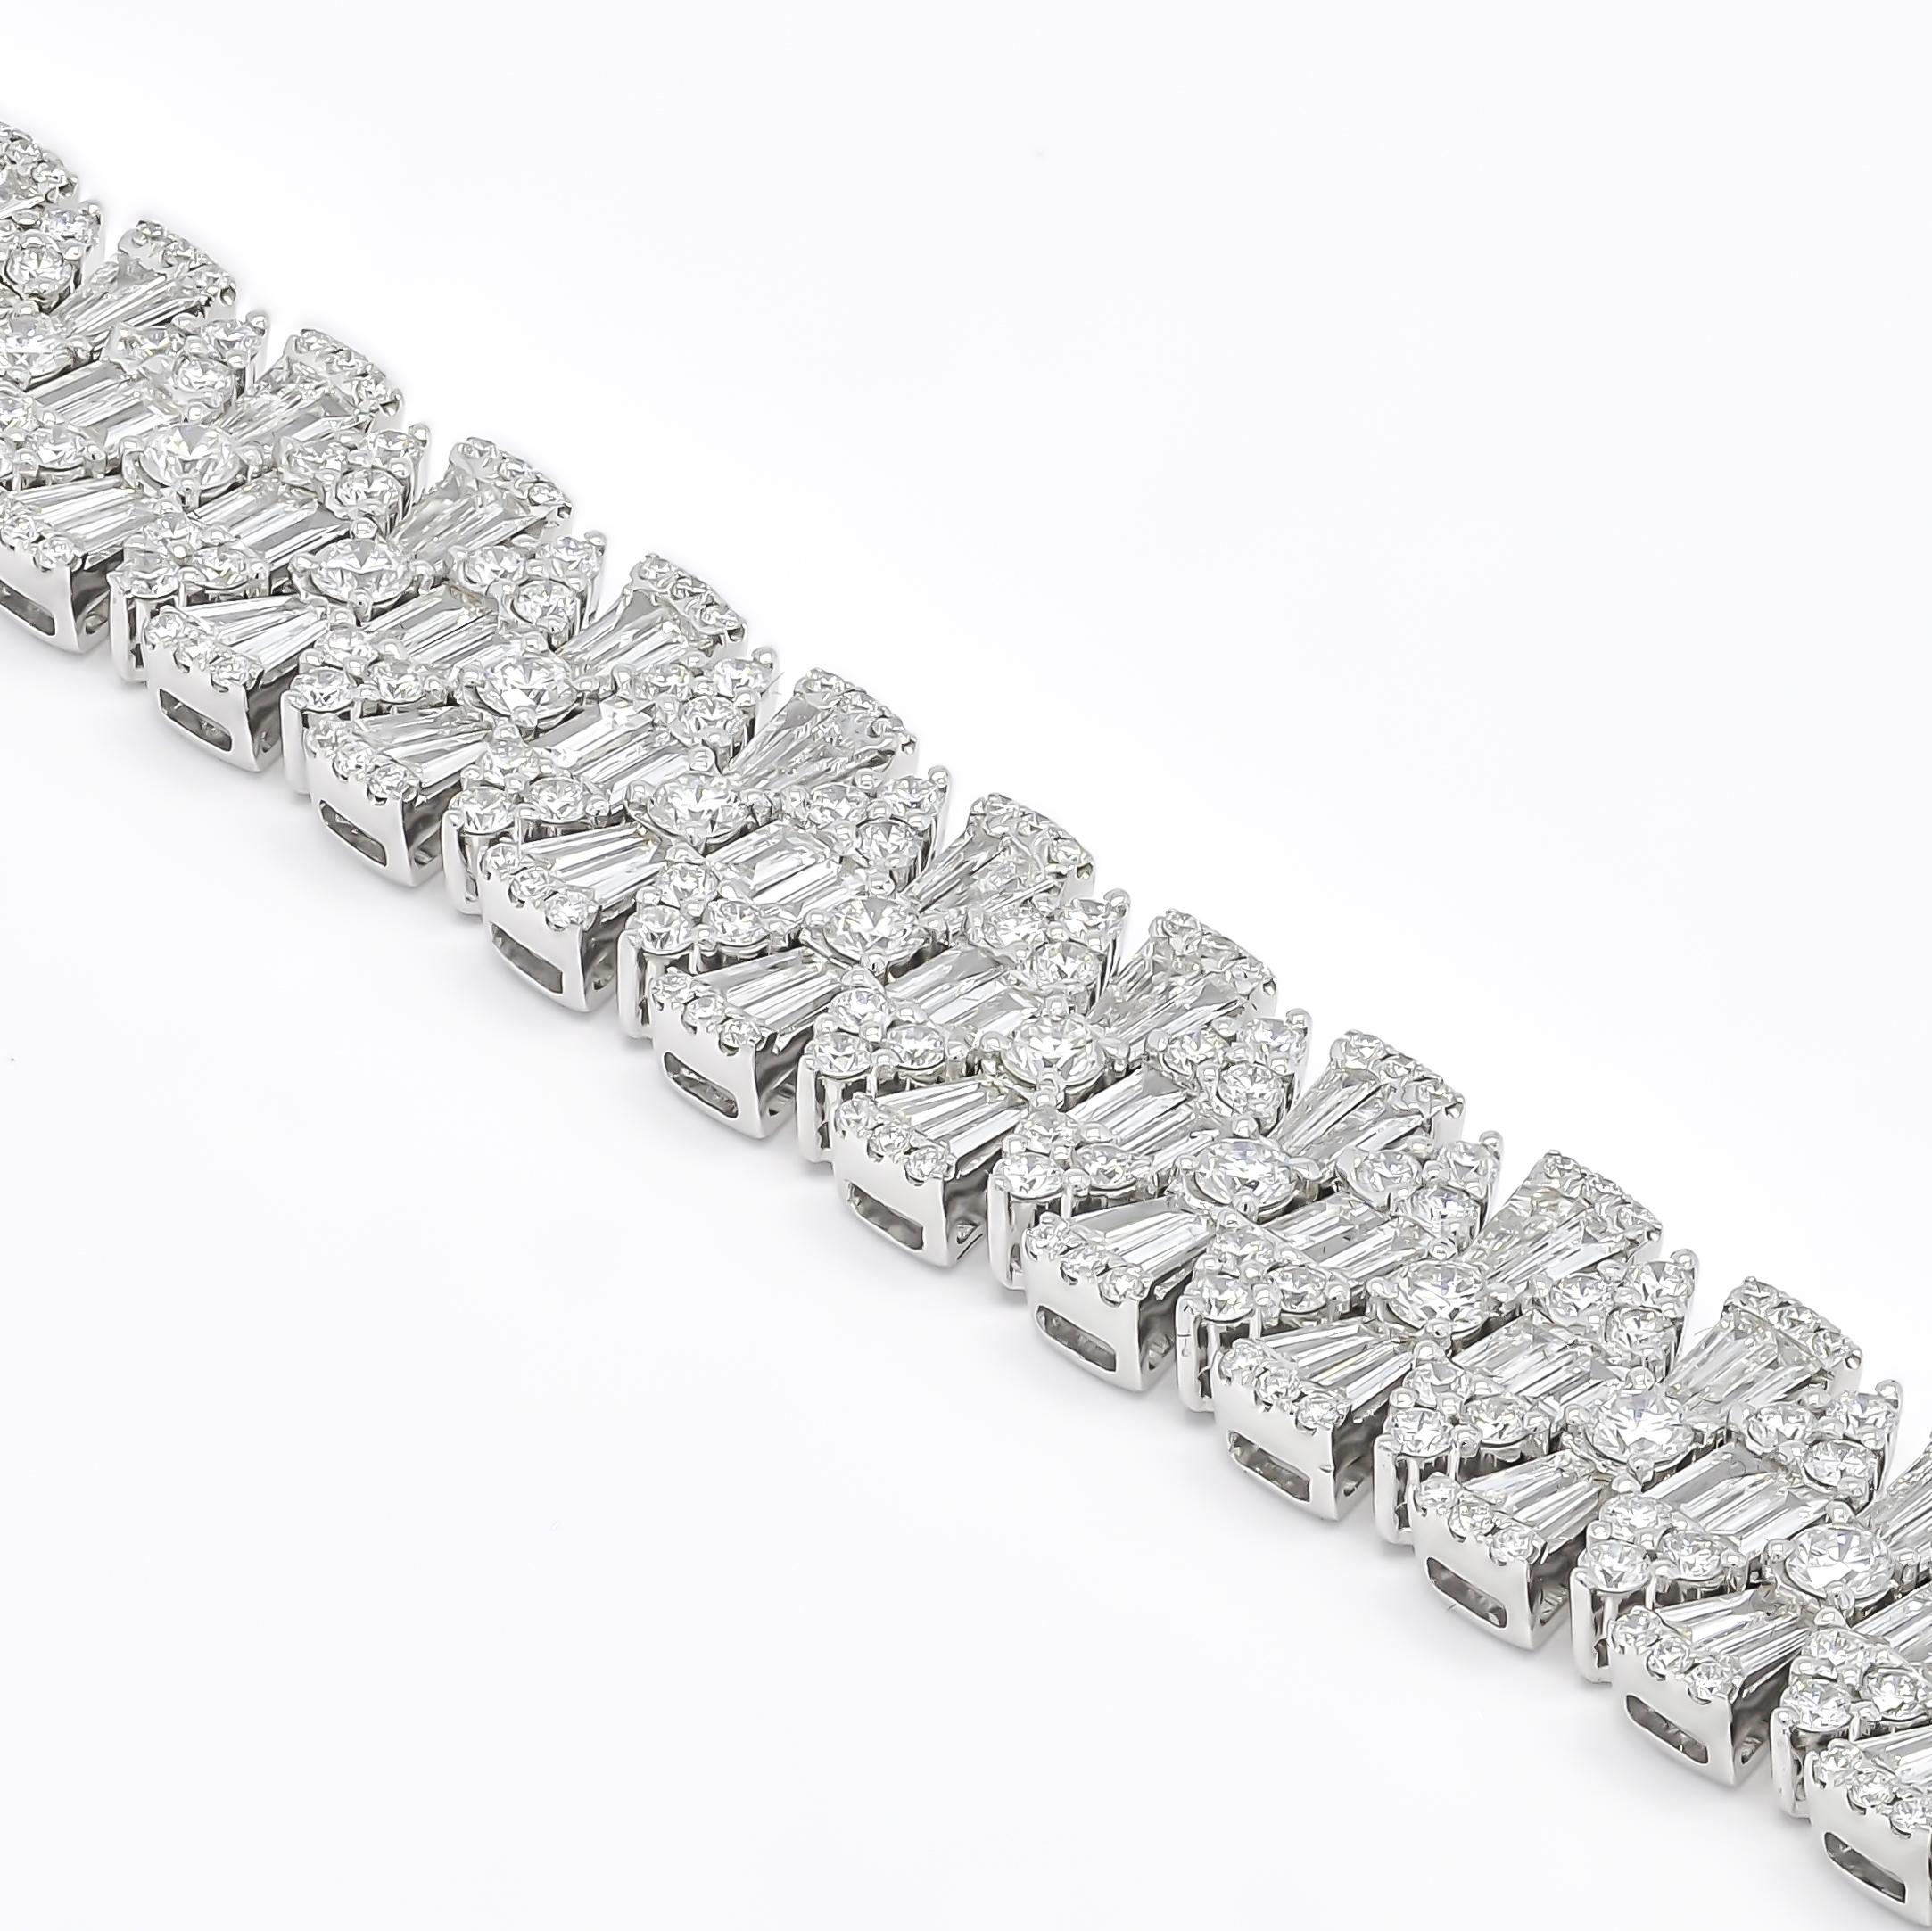 A chic row of channel set baguette diamonds flanked by classic round brilliant diamonds,
Make sparkle a priority with this glamorous diamond tennis bracelet.

Artfully set in 18k white gold, this exquisite bracelet features the soft shimmer of